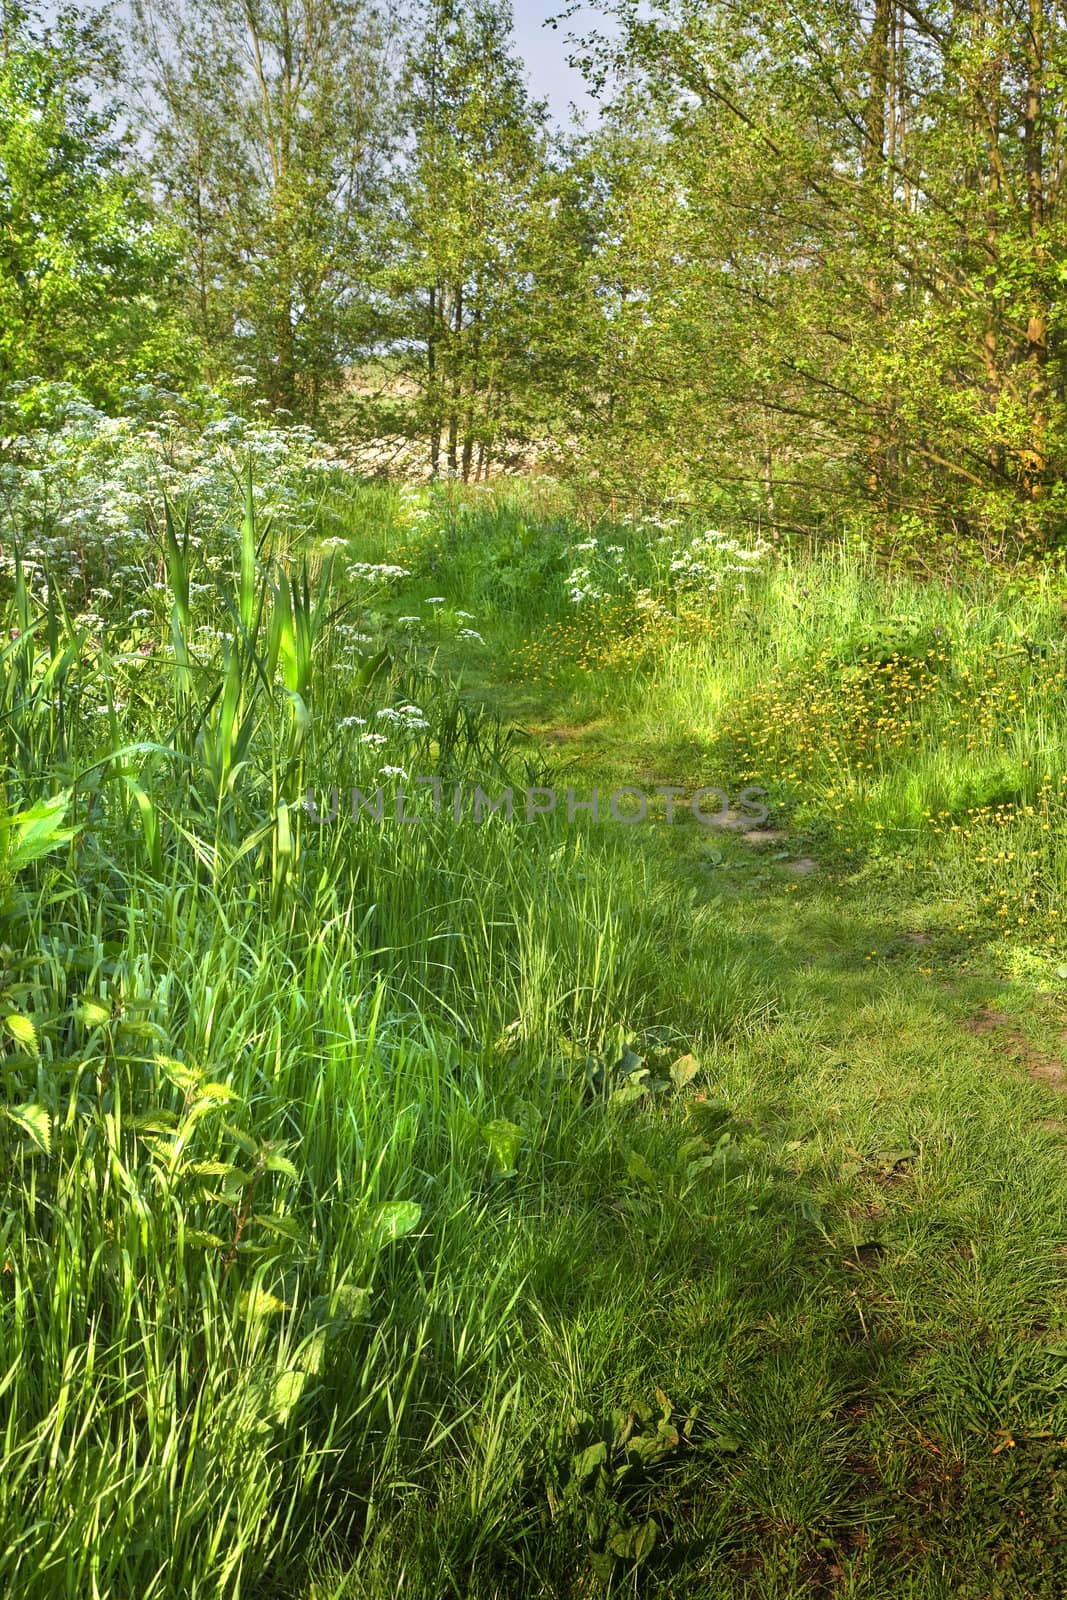 Countrylandscape with grass path and blooming flowers in spring